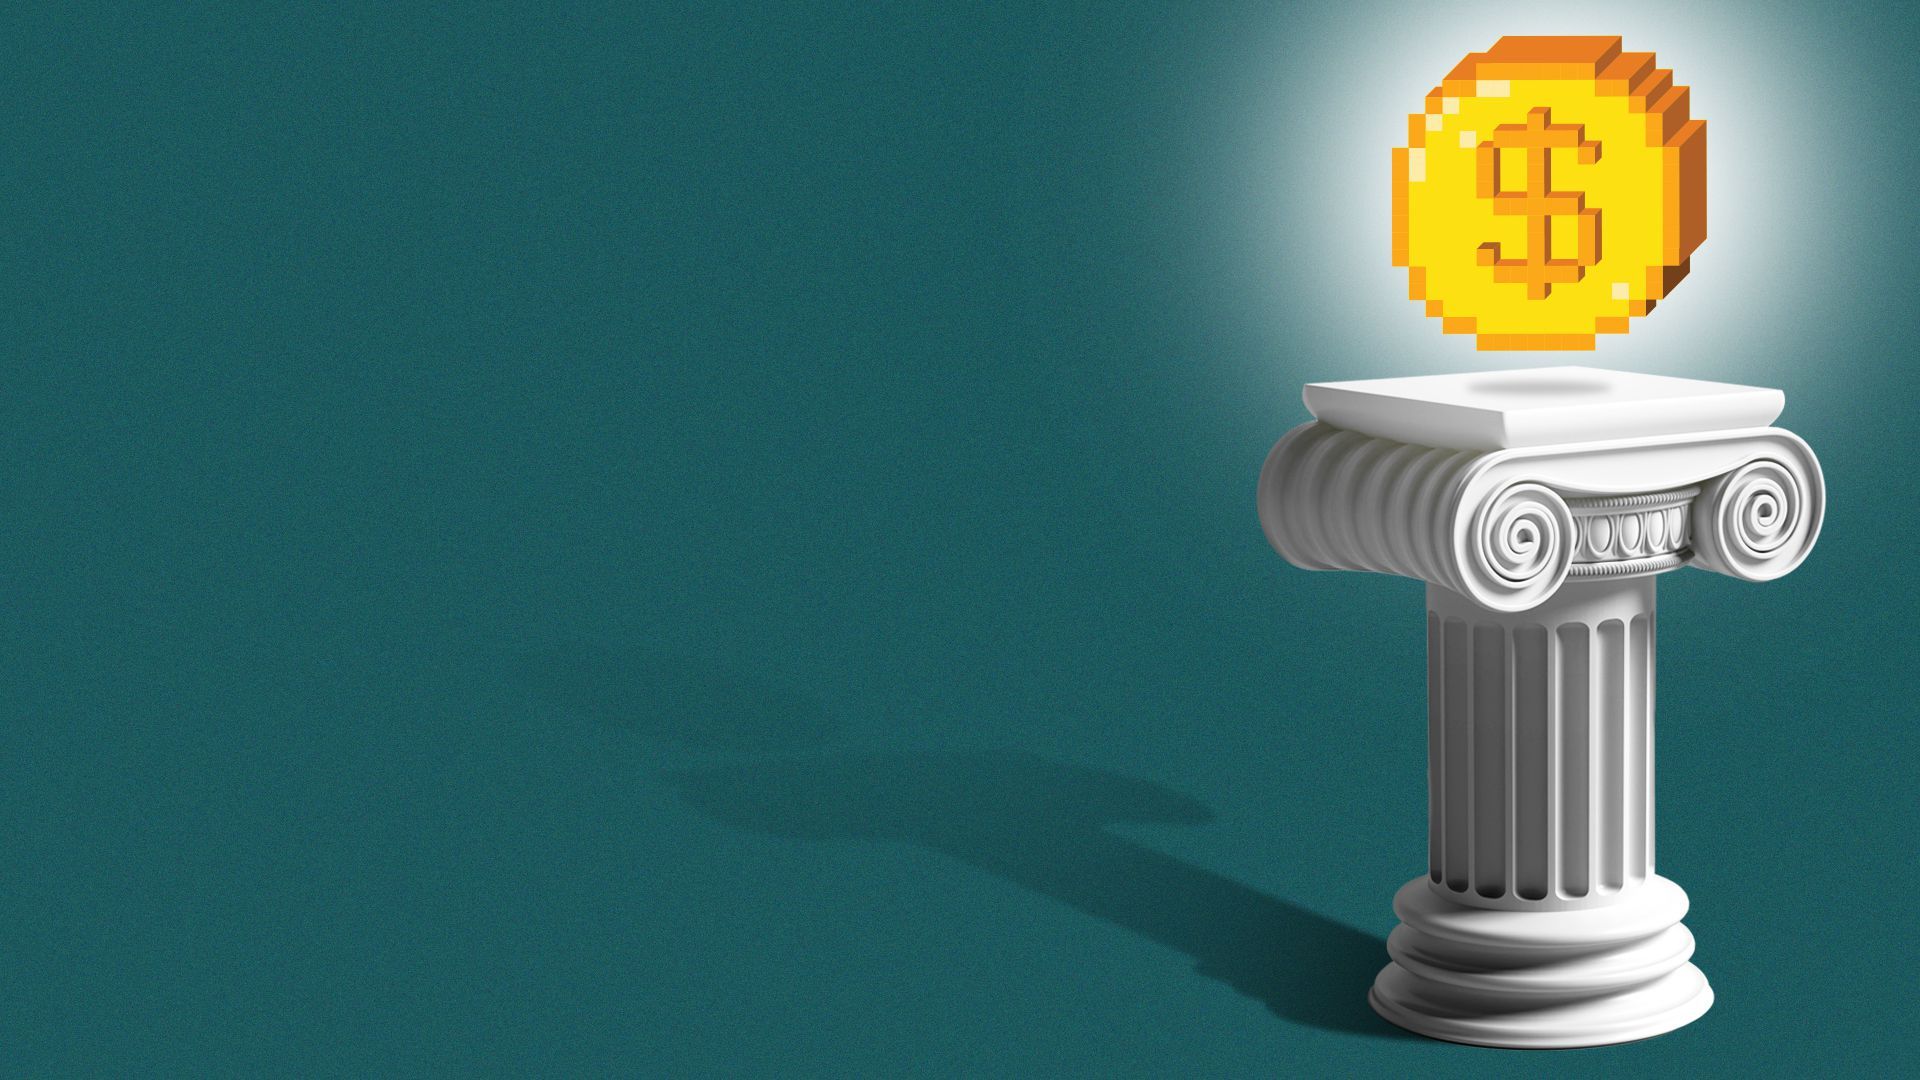 Illustration of a pixelated coin hovering above a pedestal.